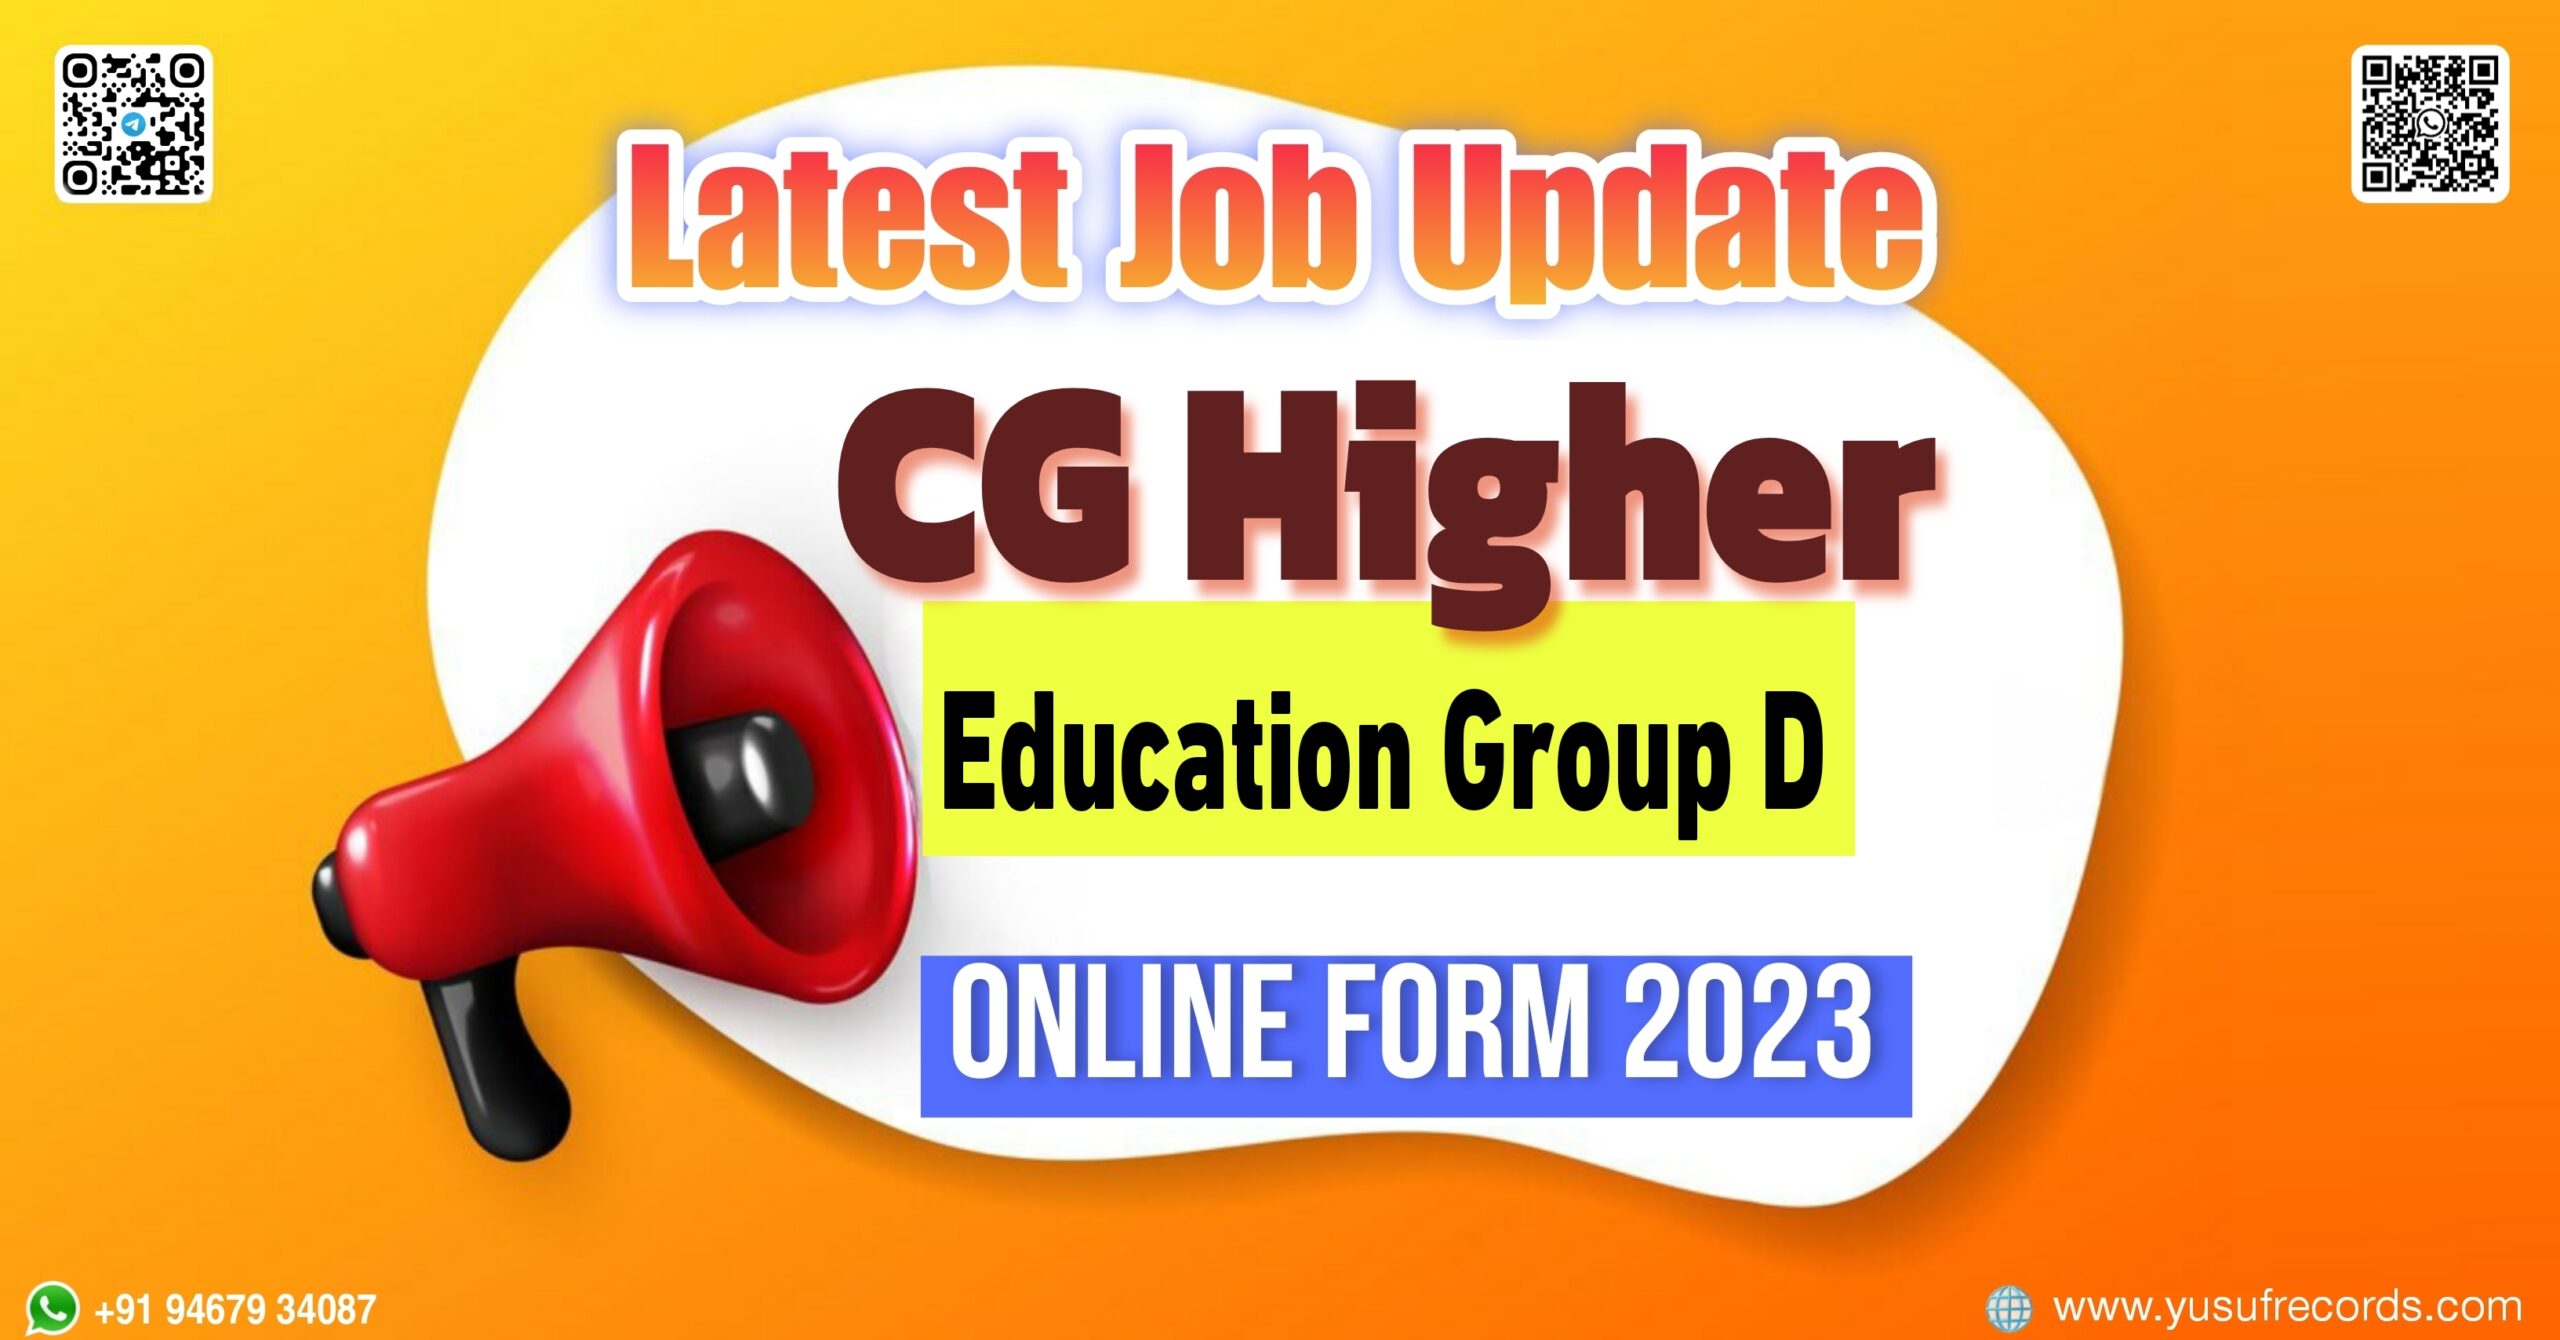 CG Higher Education Group D Online Form yusufrecords.com